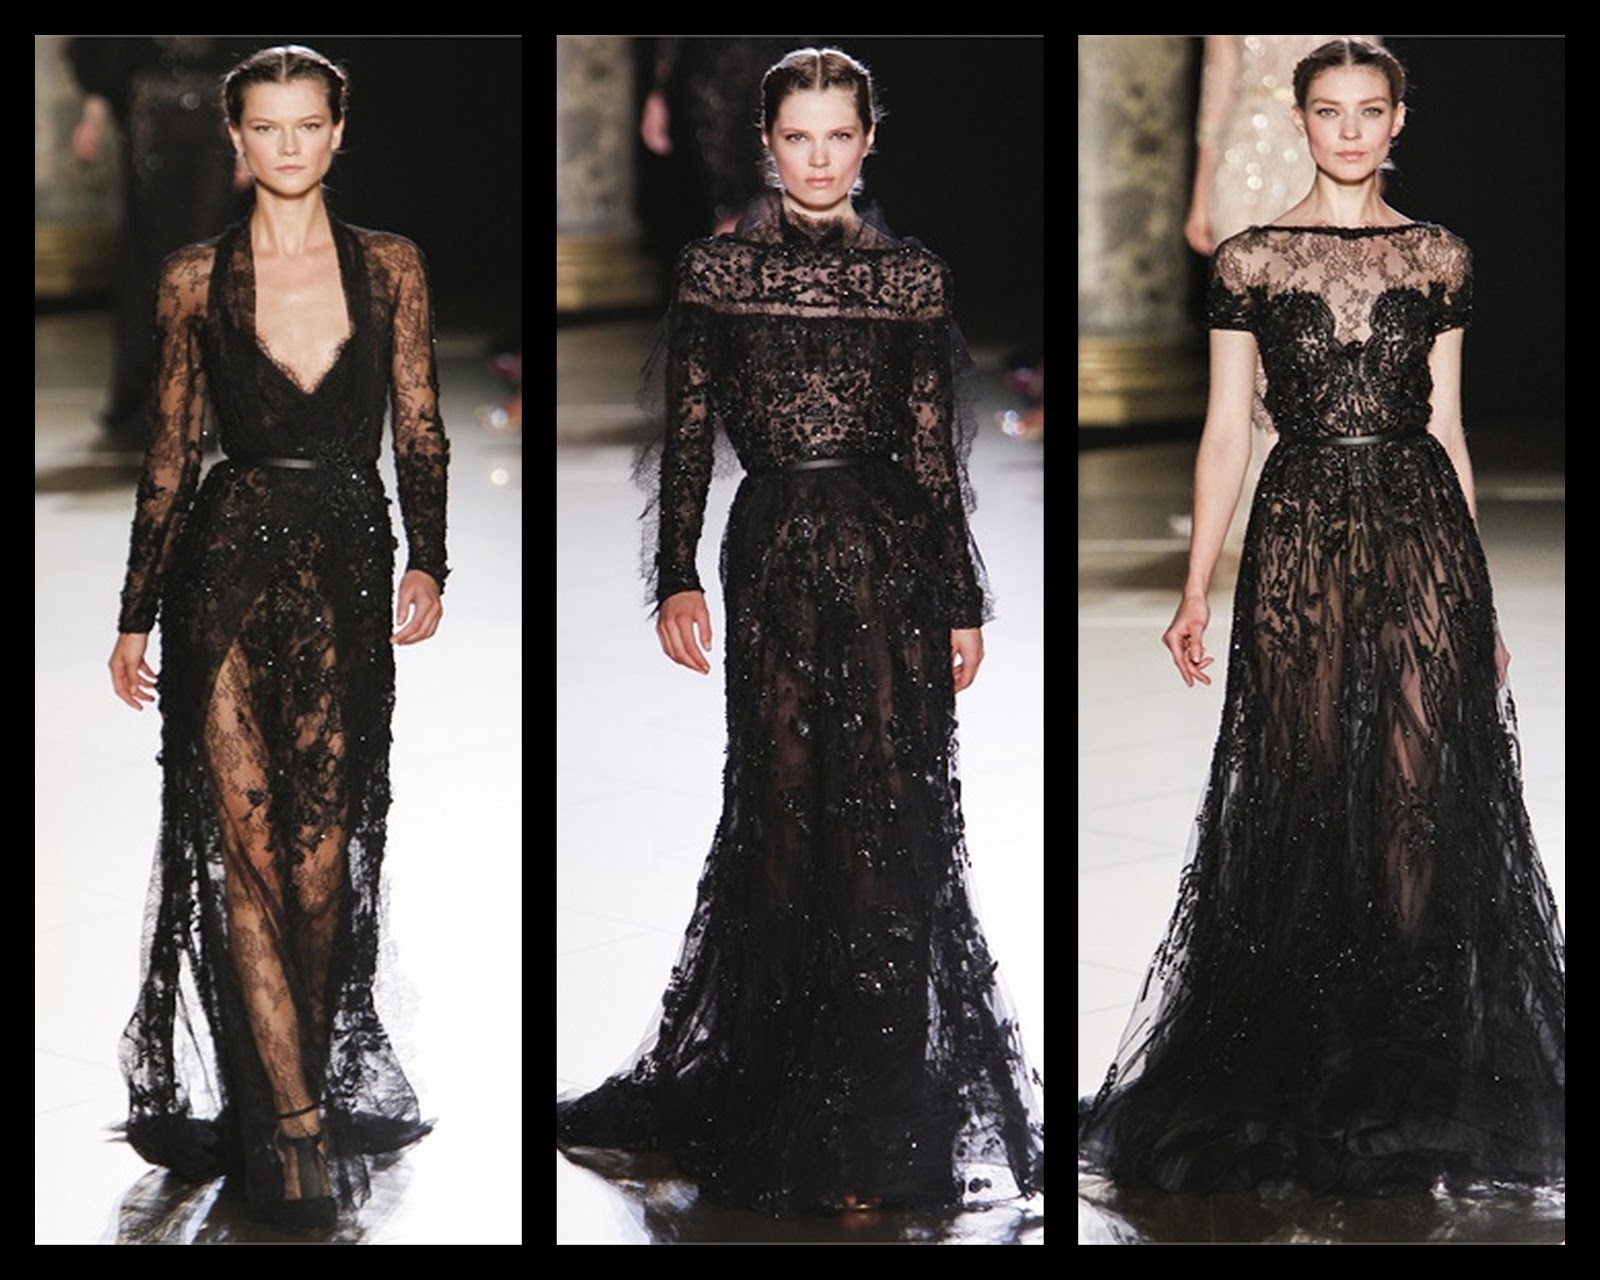 All Fashion Flowers: Elie Saab Haute Couture Fall/Winter 2012-13